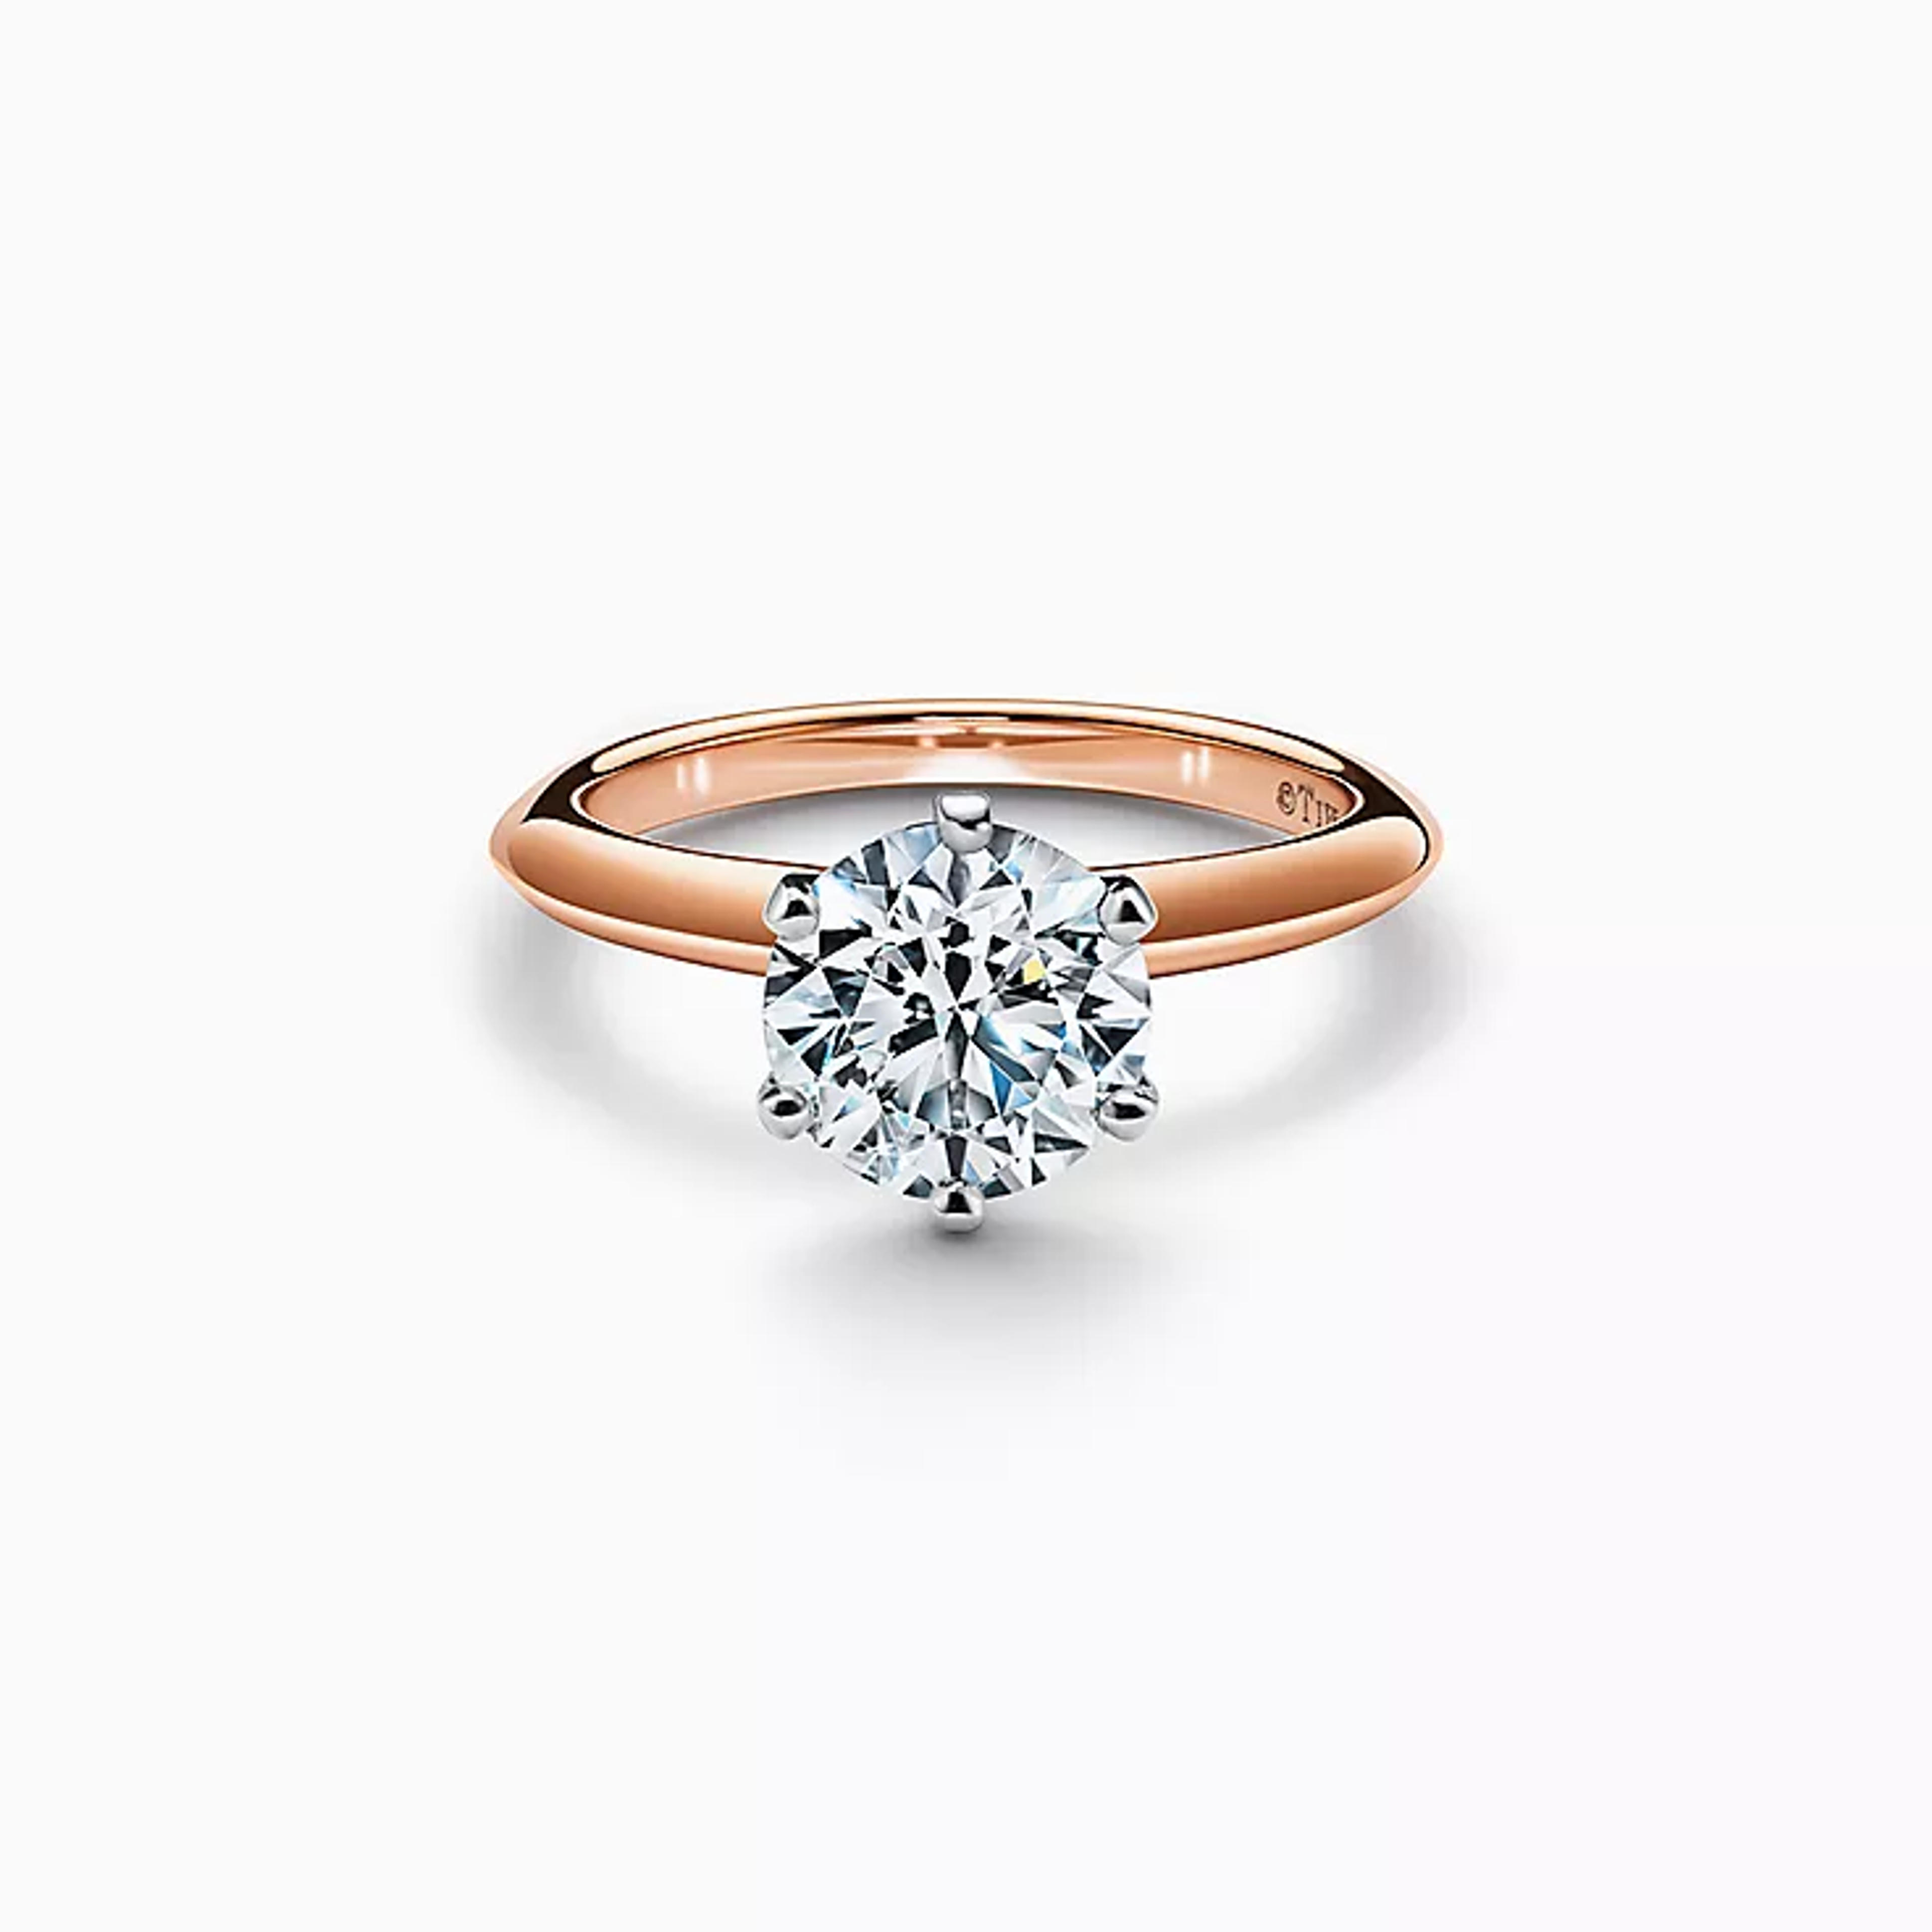 The Tiffany® Setting in 18k rose gold: world's most iconic engagement ring. | Tiffany & Co.